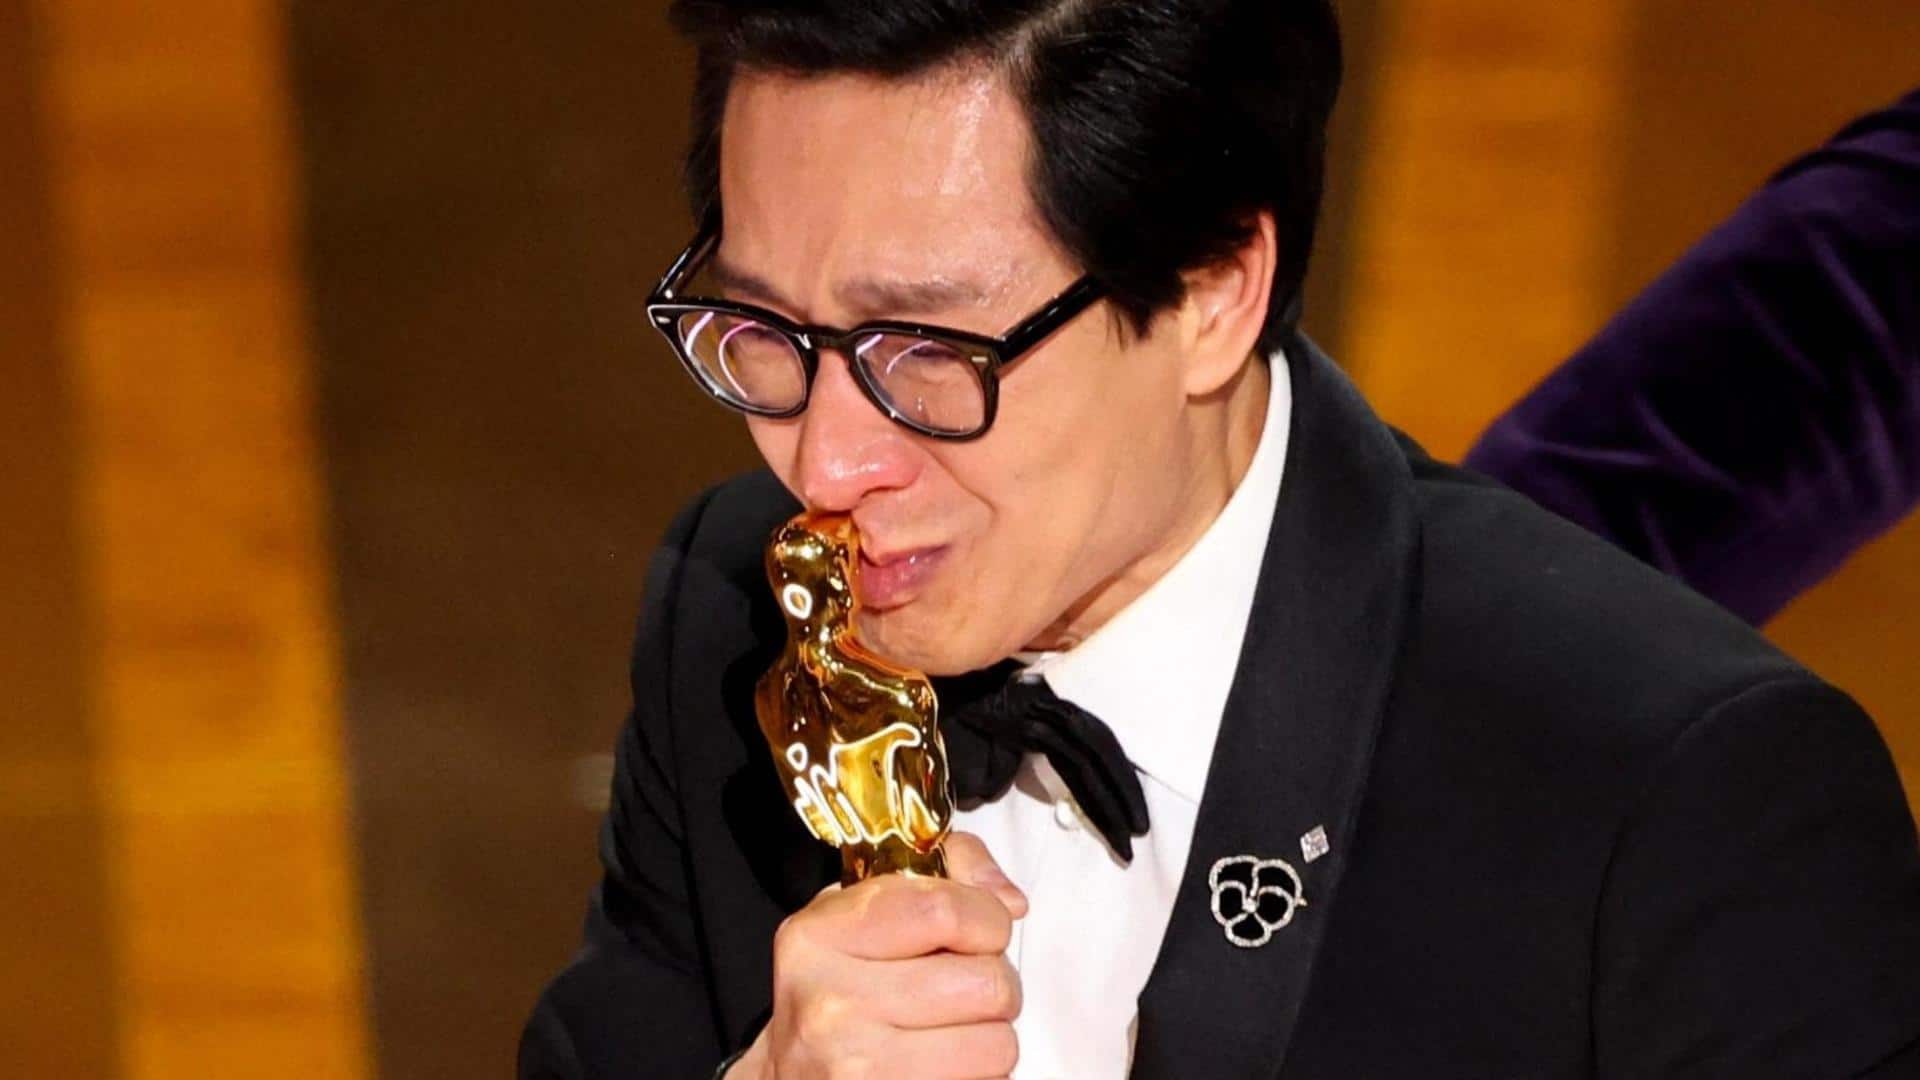 Oscars 2023 highlights: A look at the best acceptance speeches